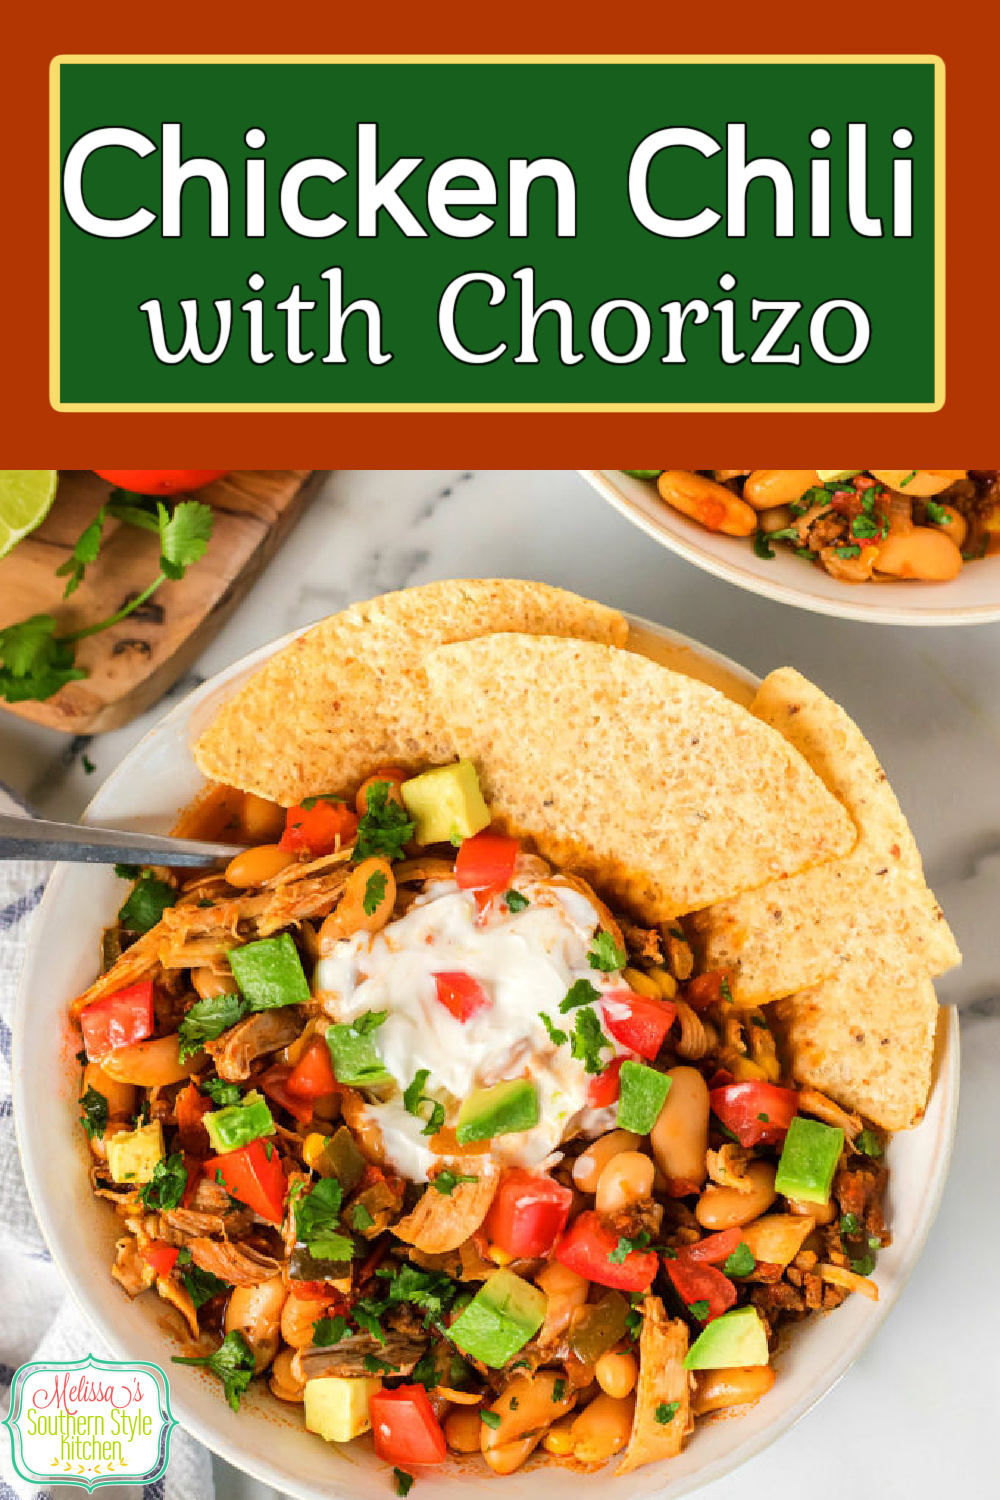 This vibrant Chicken Chili is packed with color and a pop of flavor, too! #chickenchili #chicken #chilirecipes #easychickenrecipes #dinnerideas #dinner #chili #southernfood #southernrecipes